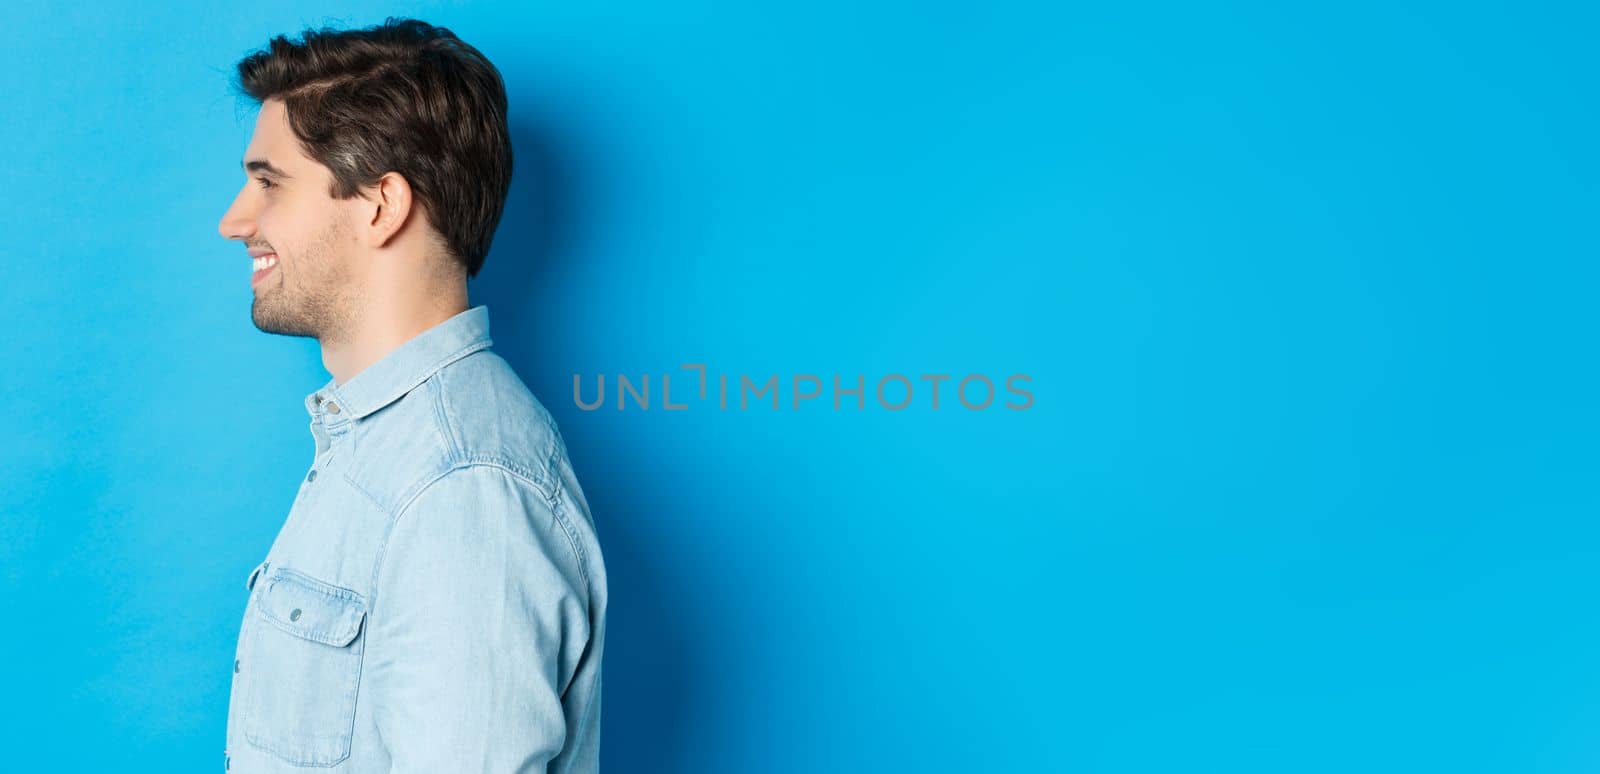 Profile of handsome young man looking left, smiling happy, standing over blue background.